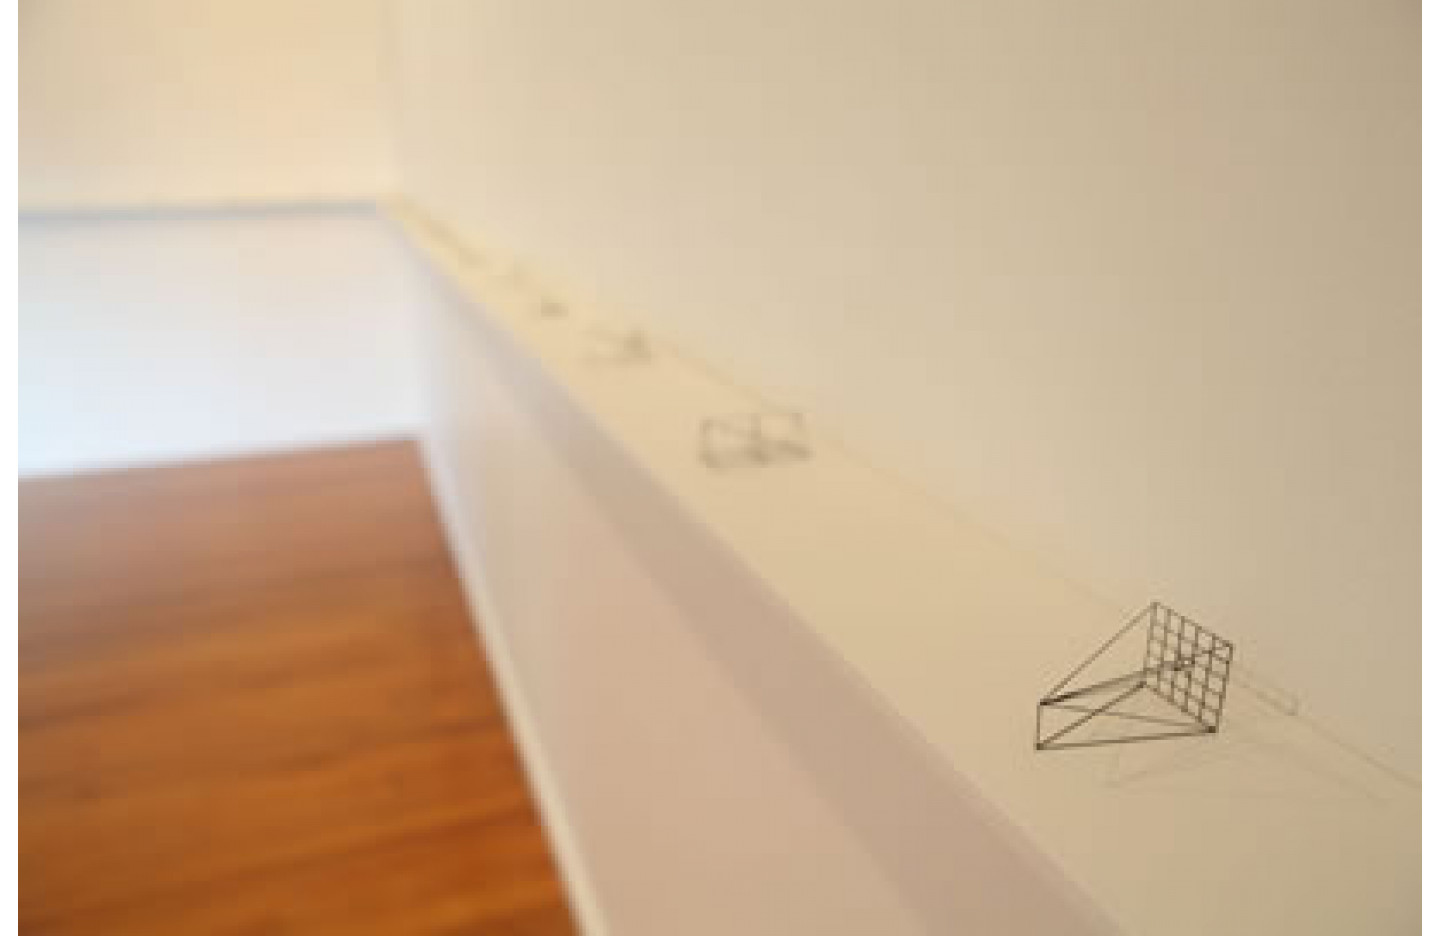 Selected Proofs, Ramp Gallery (2012)